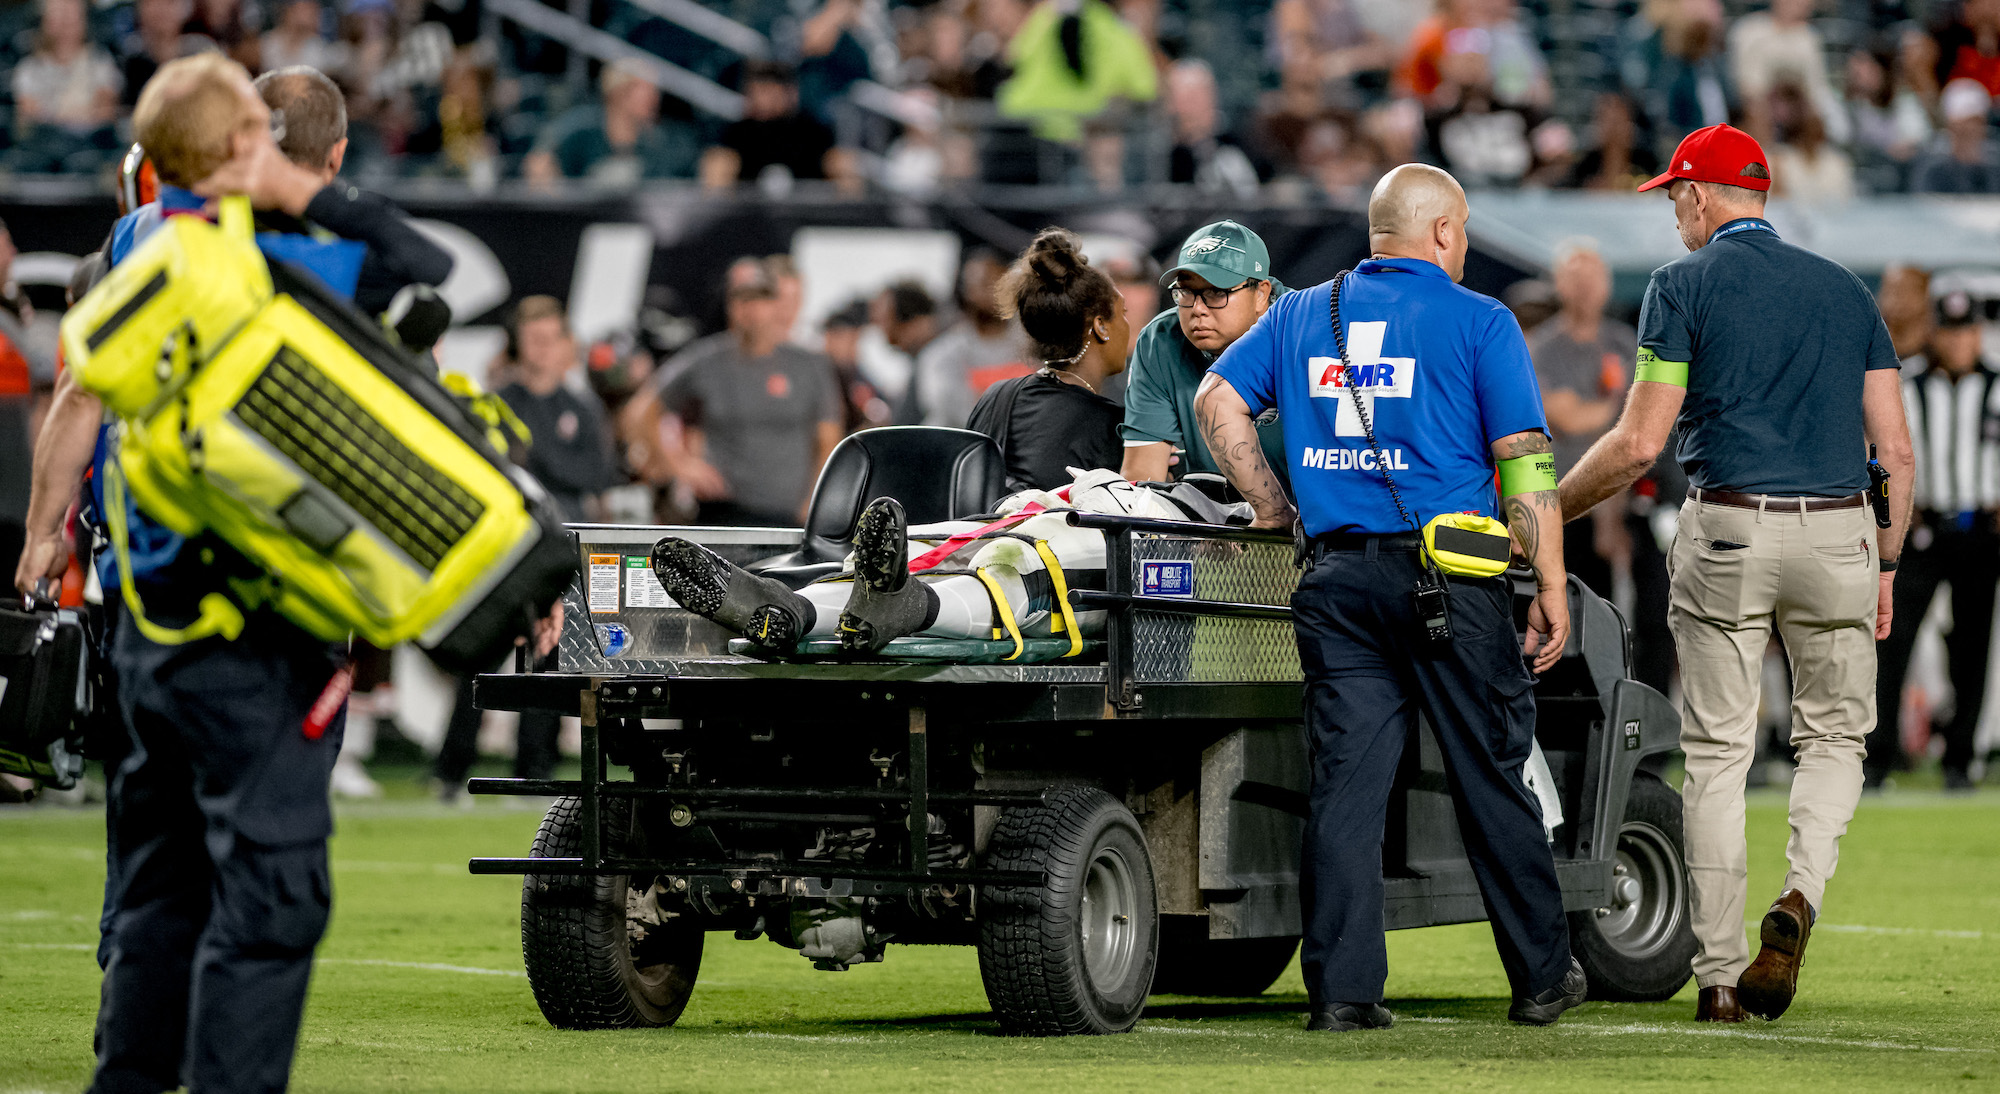 Two Eagles players stretchered off field after neck injuries during game